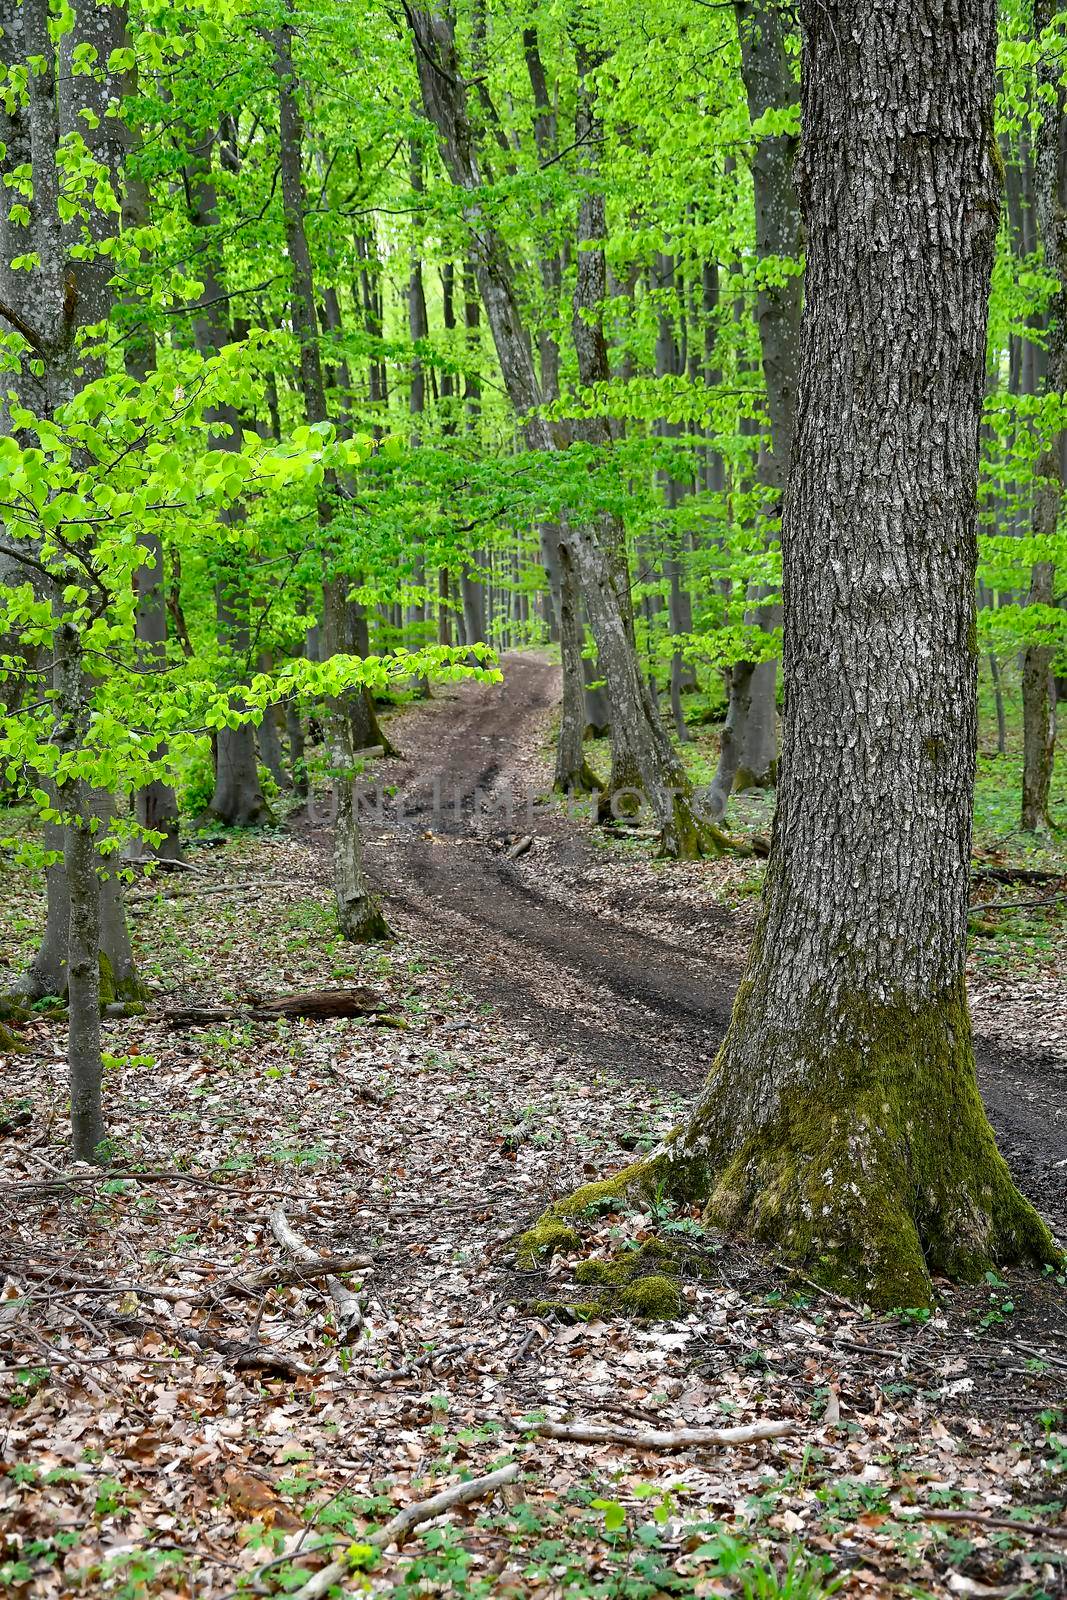 forest in springtime with first green leaves